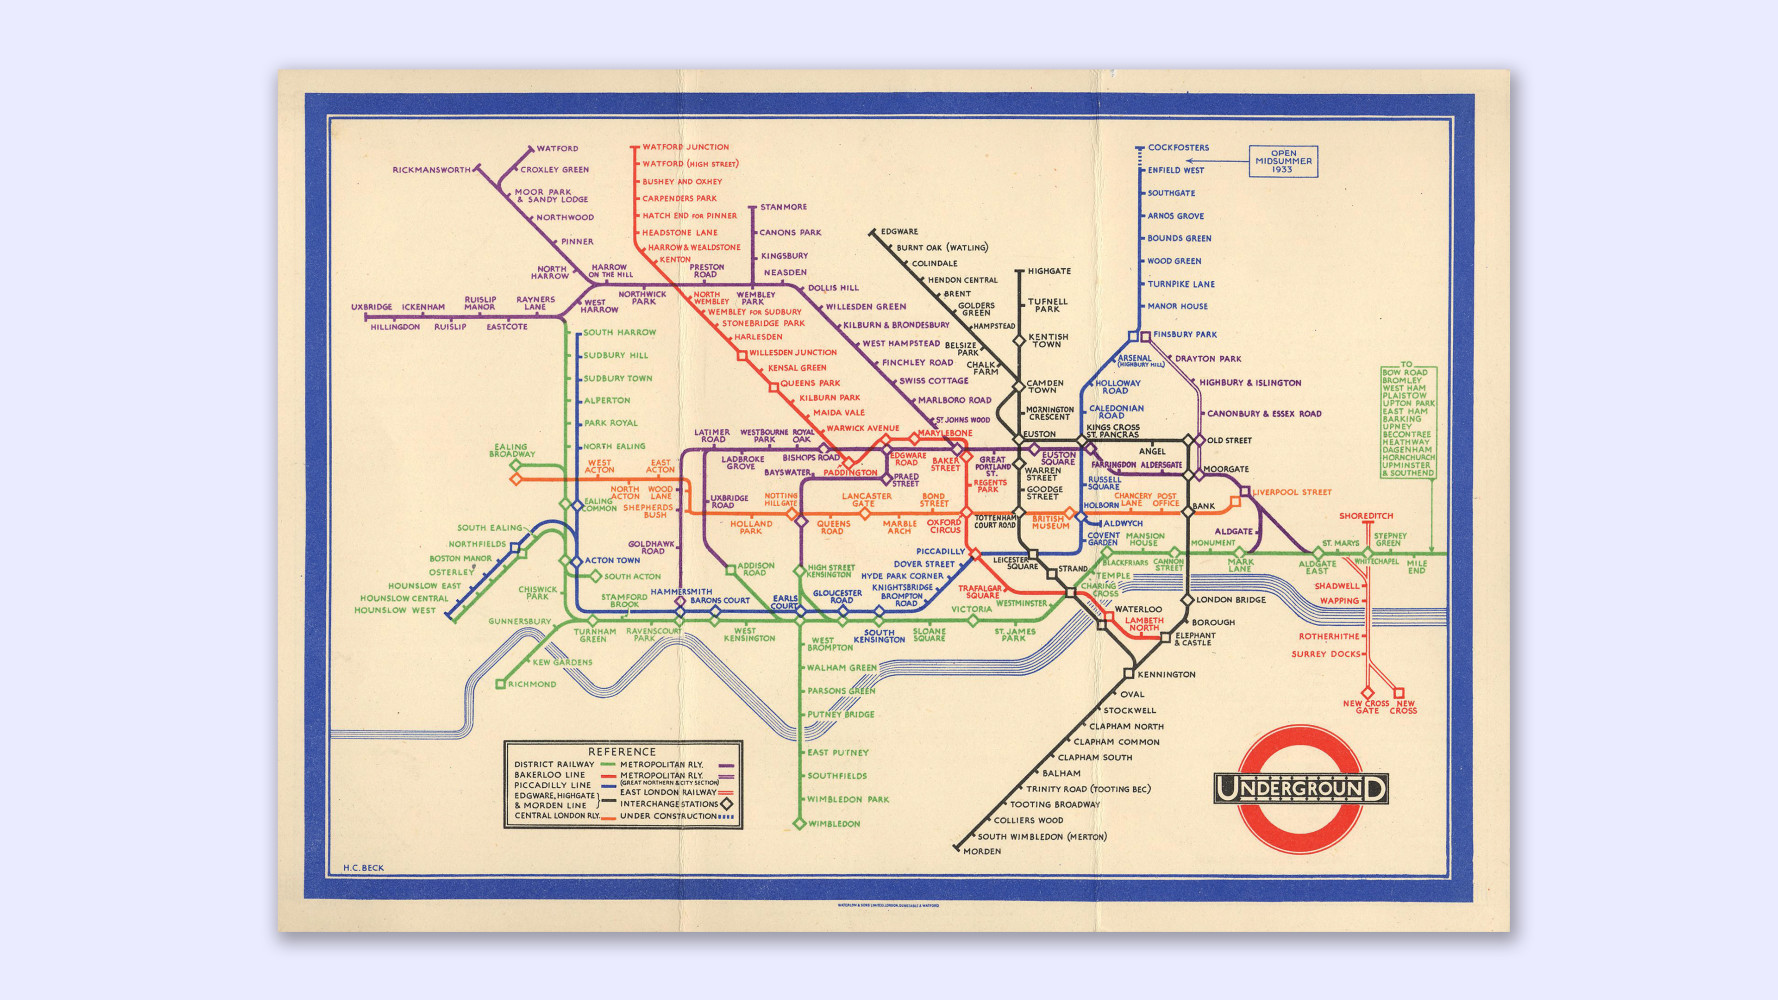 The 1933 map of the London Underground by designer Harry Beck.